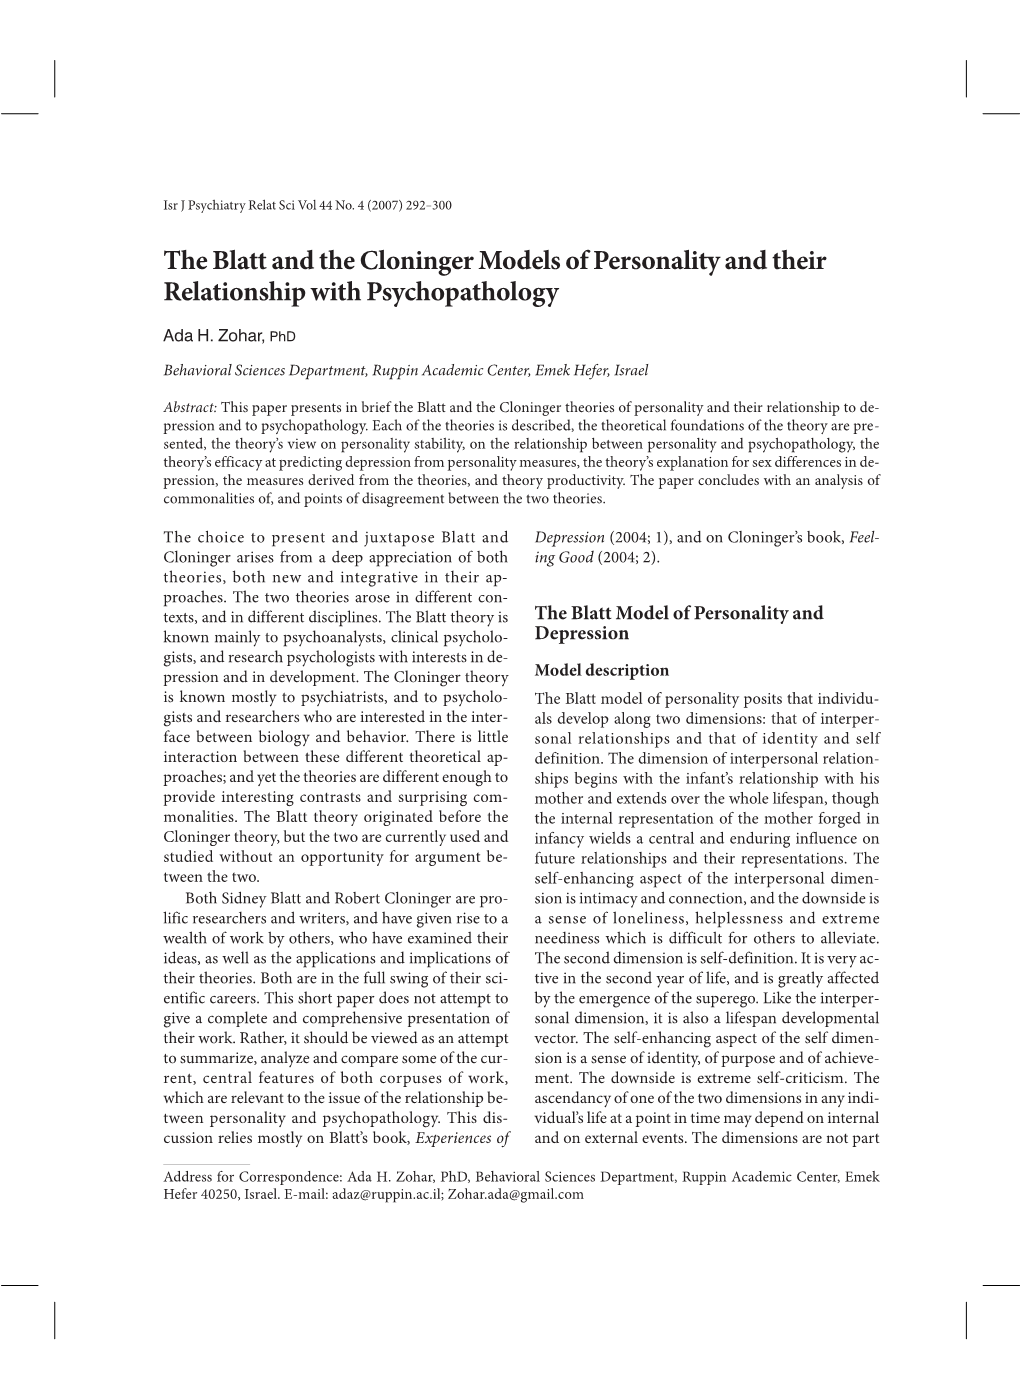 The Blatt and the Cloninger Models of Personality and Their Relationship with Psychopathology